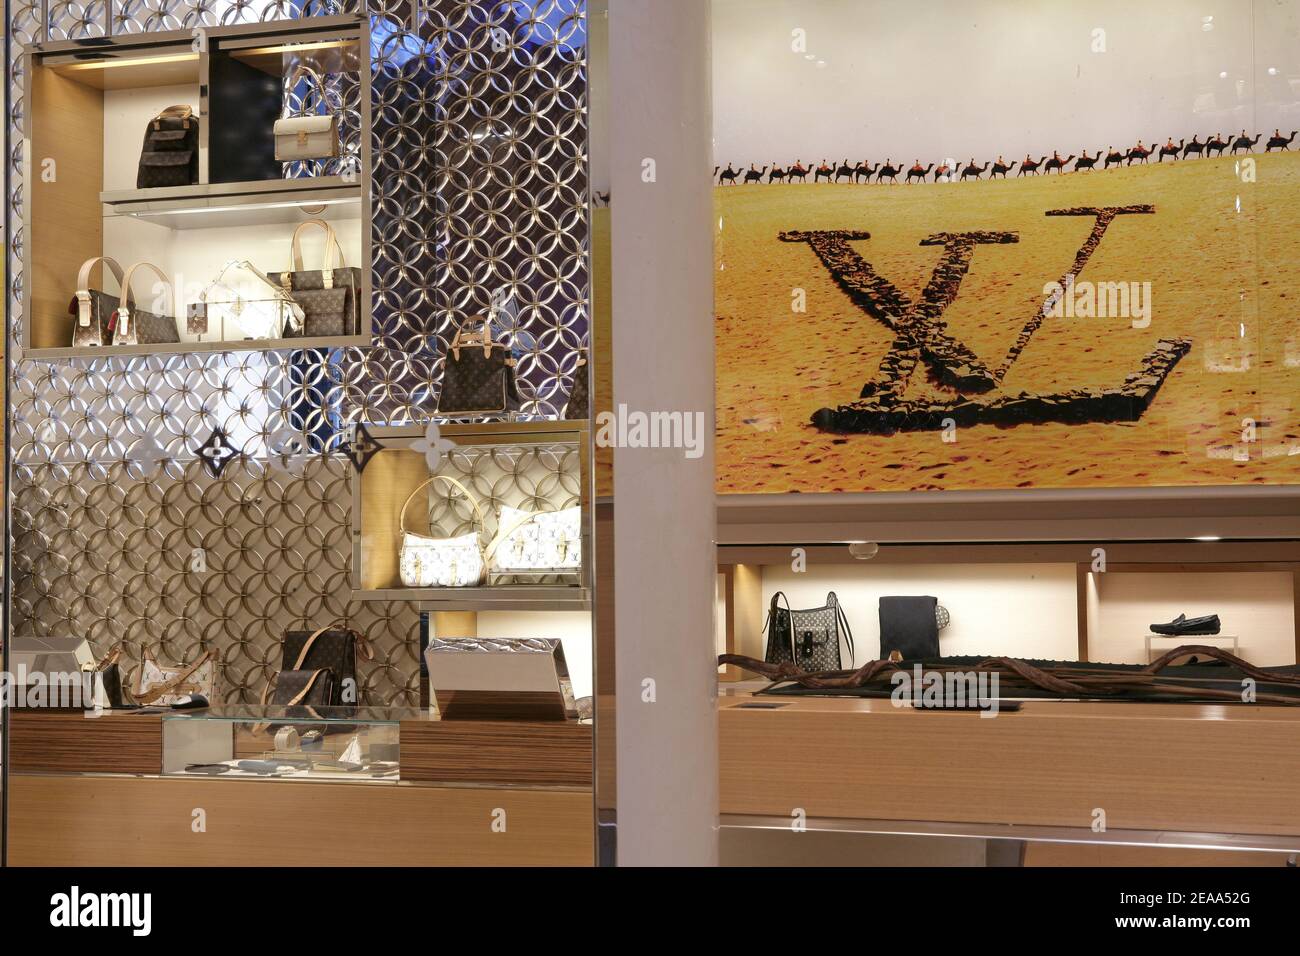 Inside view of the new Louis Vuitton store of the Champs Elysees avenue in  Paris, France on october 20, 2005. The store is the world's biggest luxury  store. The newly remodeled store